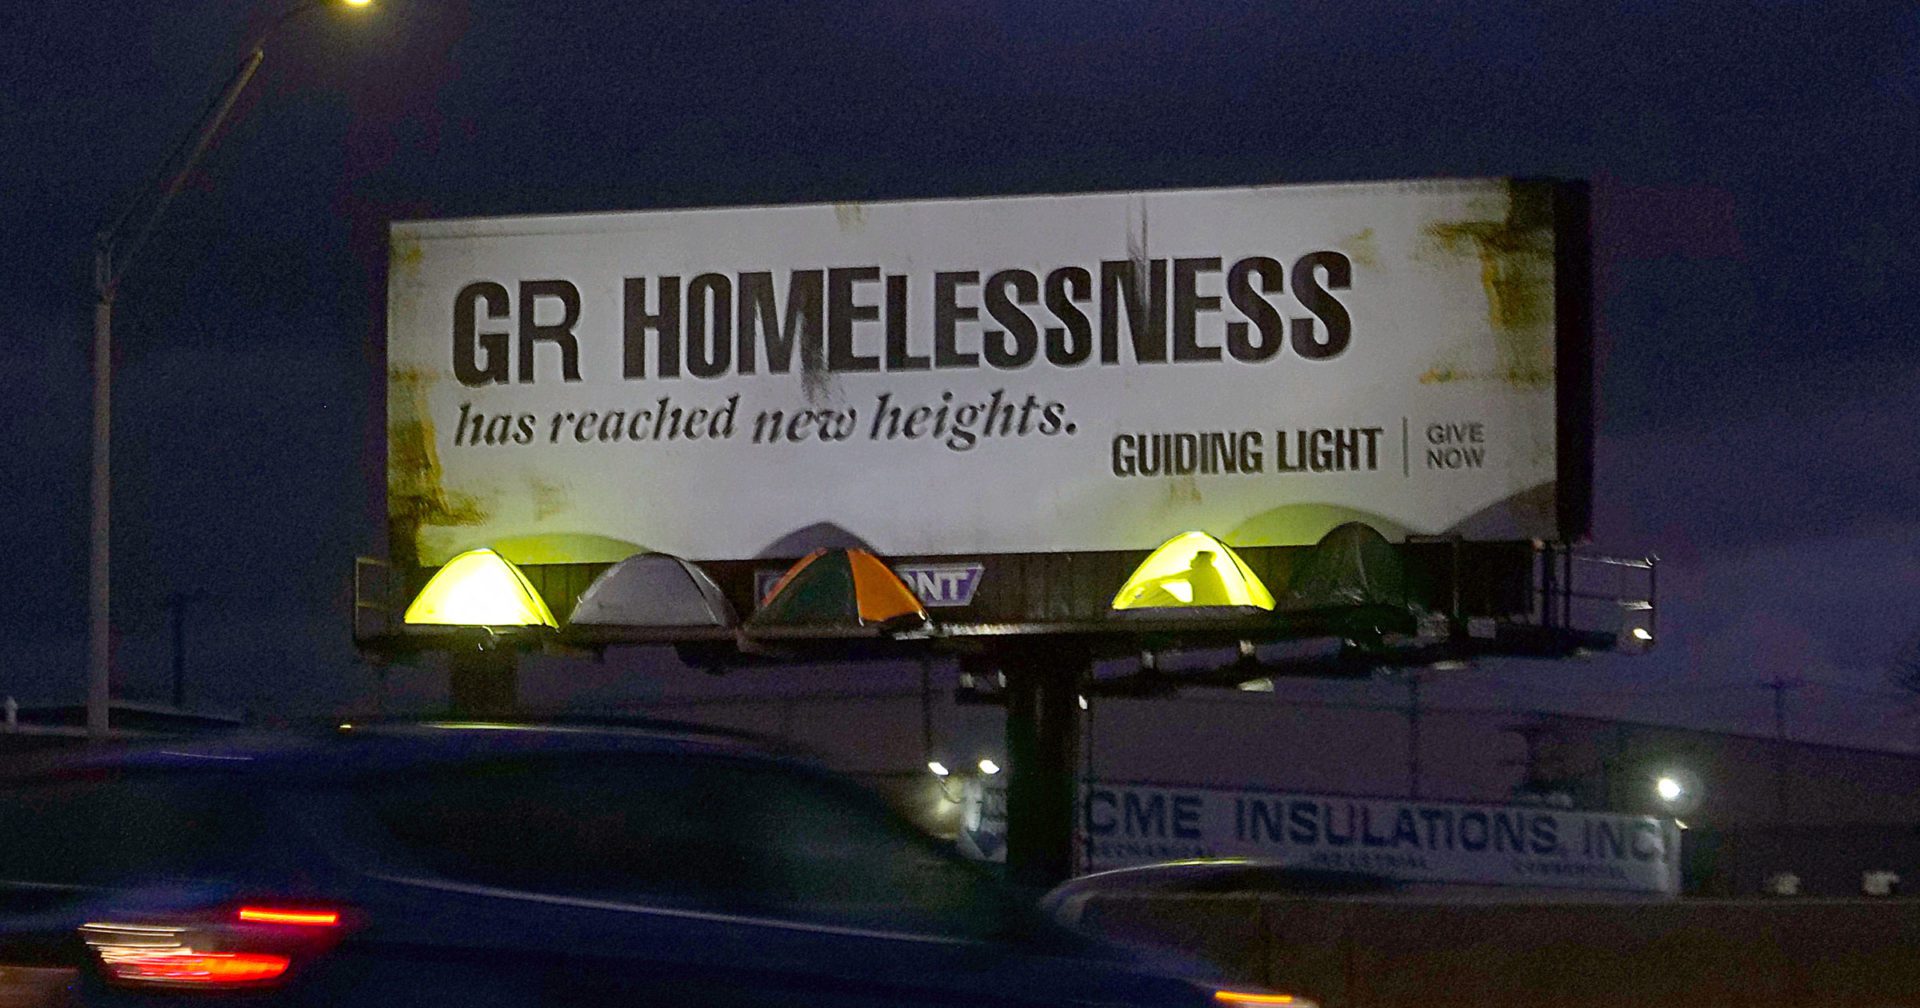 Extra Credit Projects Heightens Awareness of Homelessness in Grand Rapids